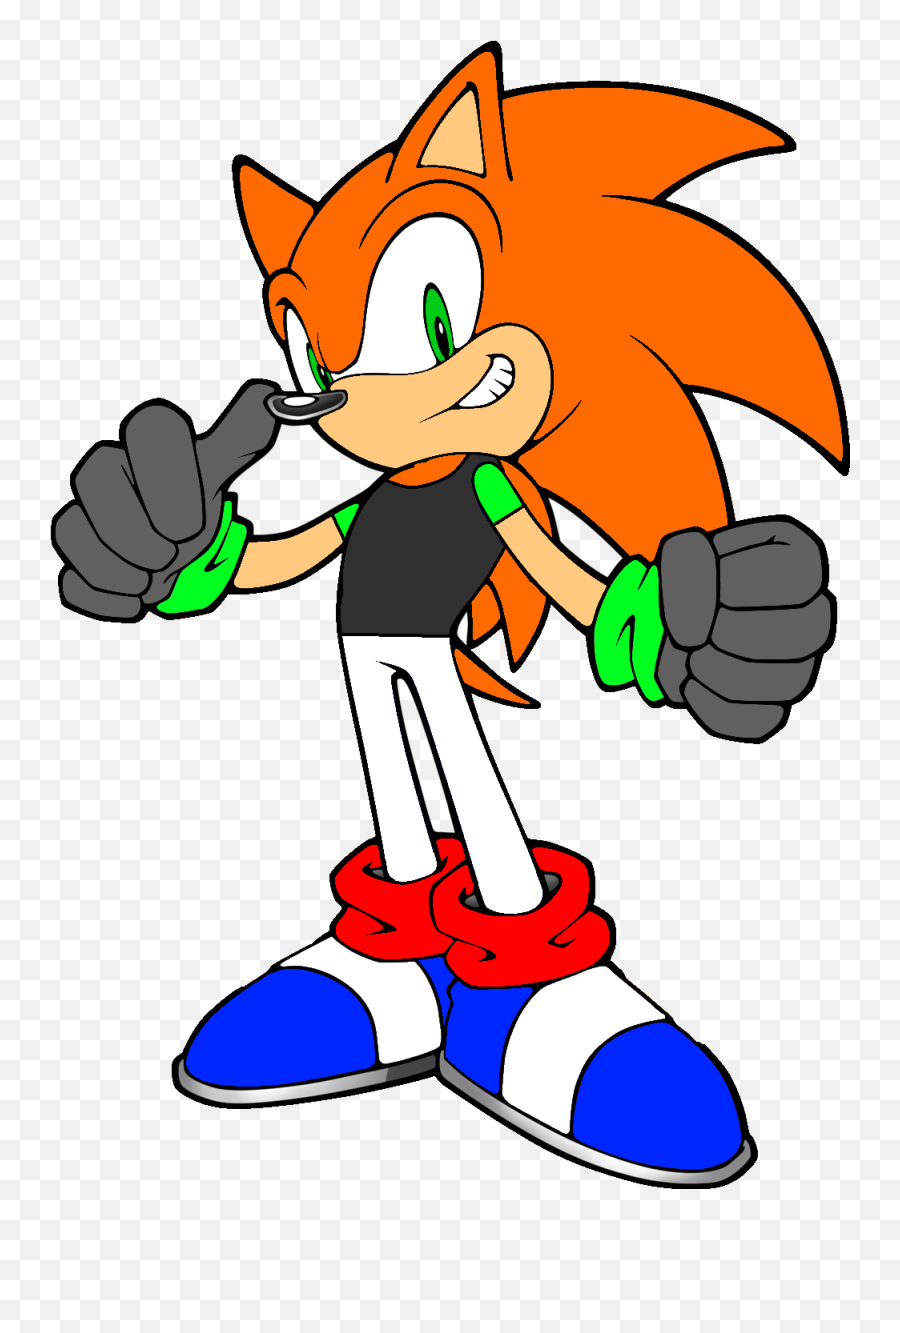 Download Super Sonic The Hedgehog - Sonic The Hedgehog Sonic The Hedgehog Orange Friend Png,Super Sonic Png